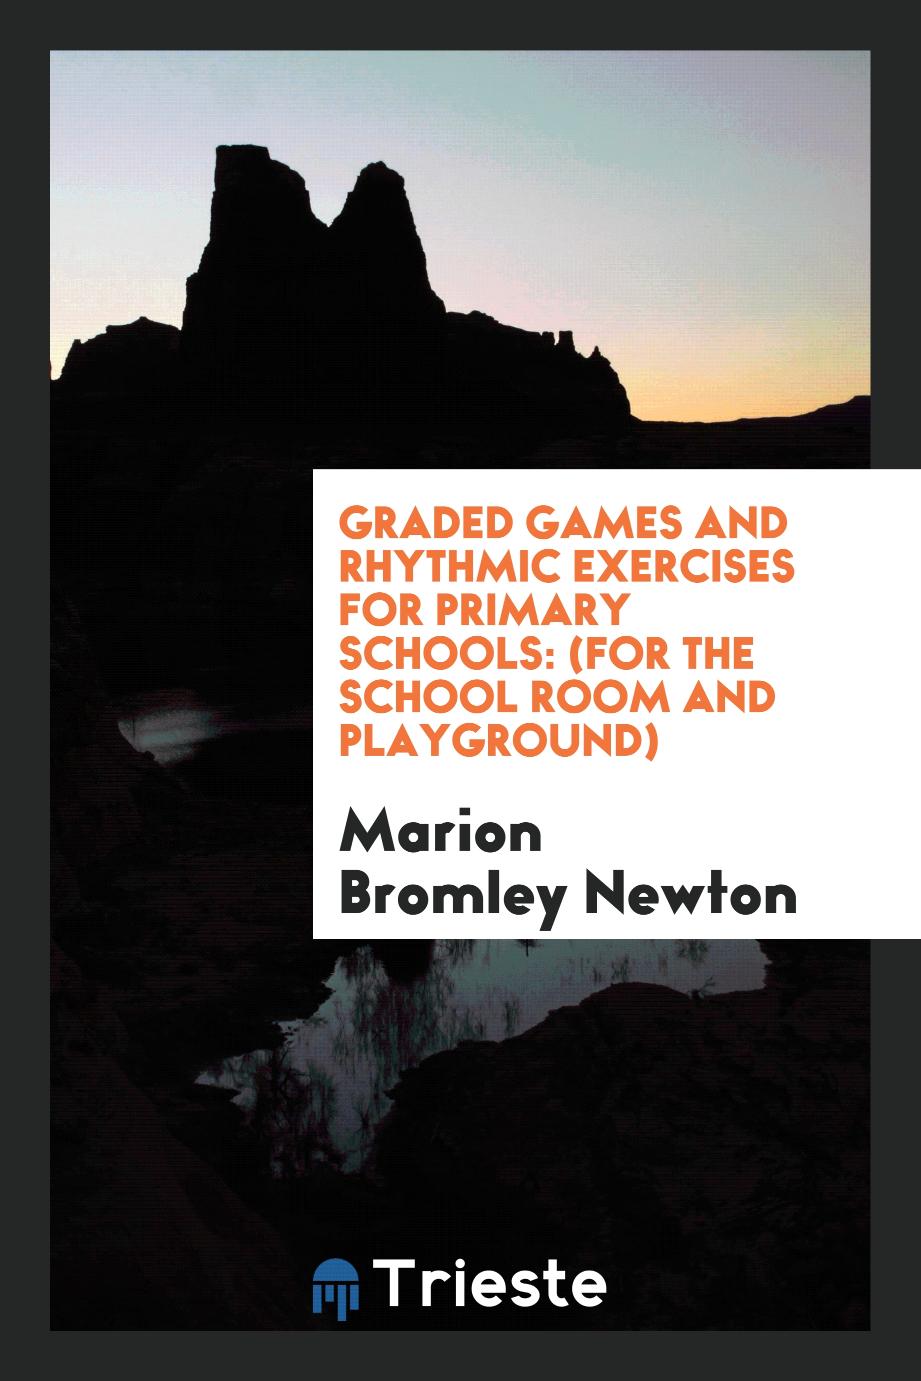 Graded Games and Rhythmic Exercises for Primary Schools: (For the School Room and Playground)